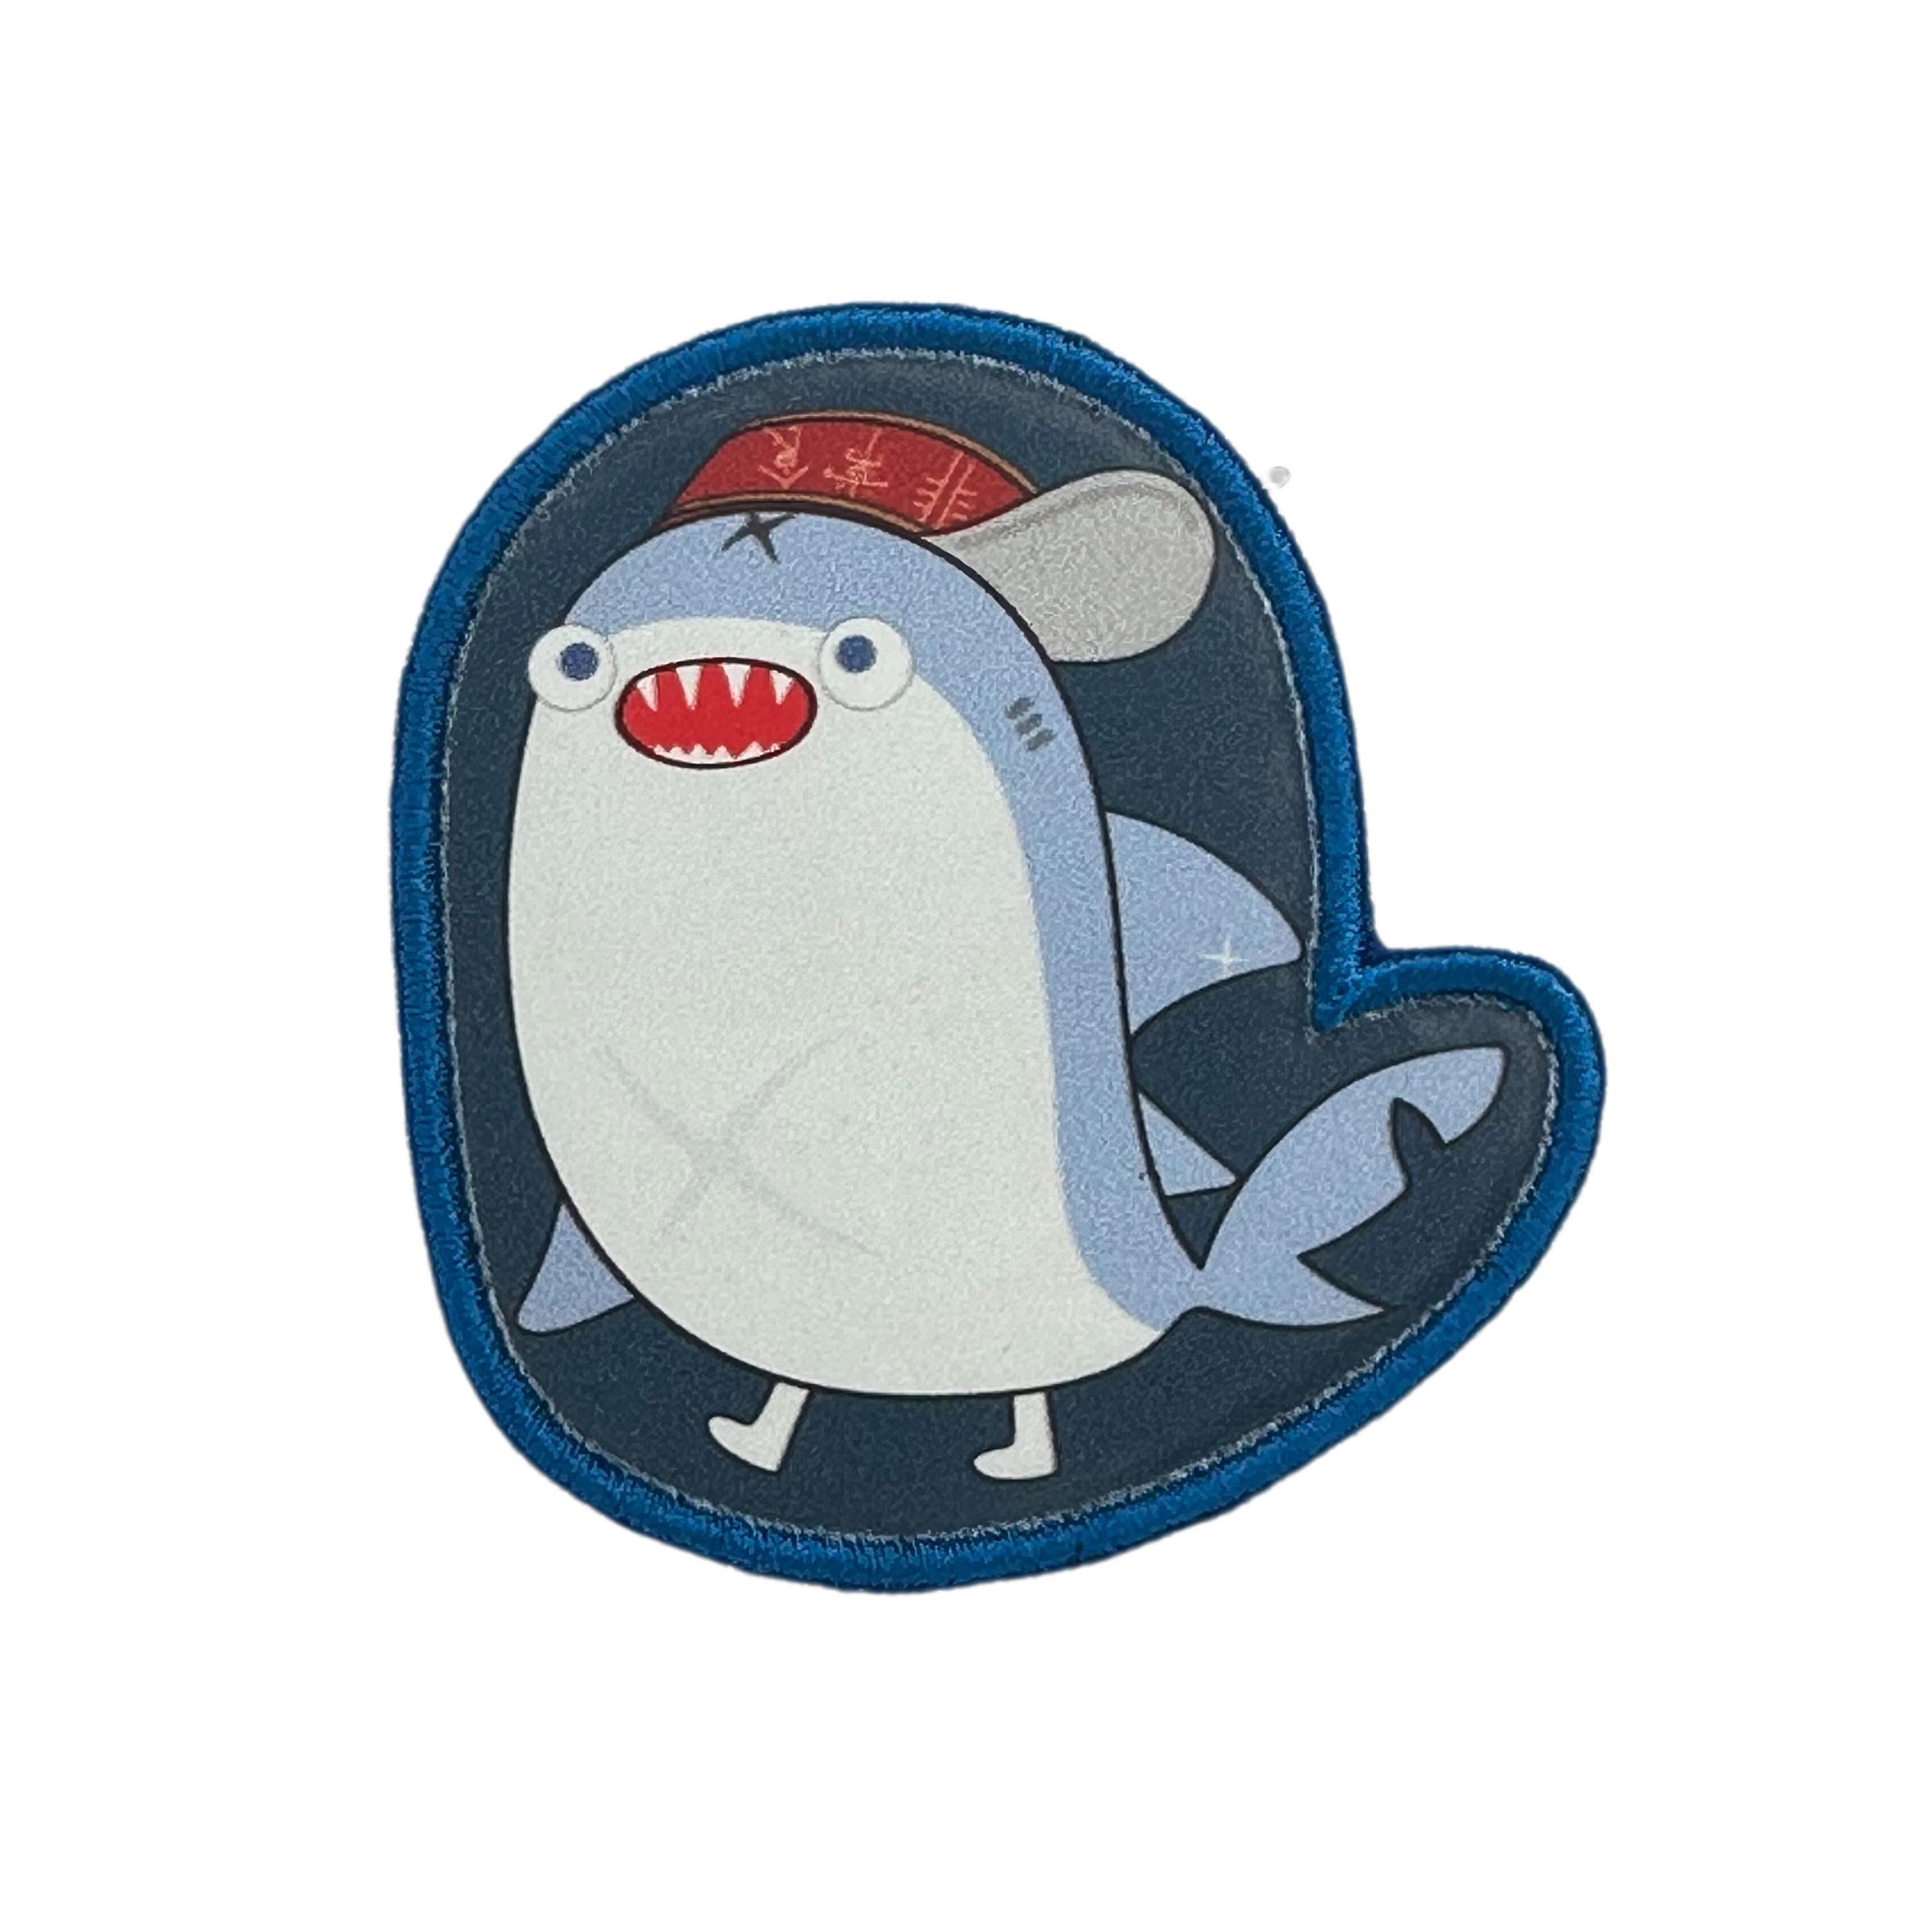 Printed Morale Patches - Hololive Bloop Gawr Gura Mascot VTuber Velcro Morale Patch